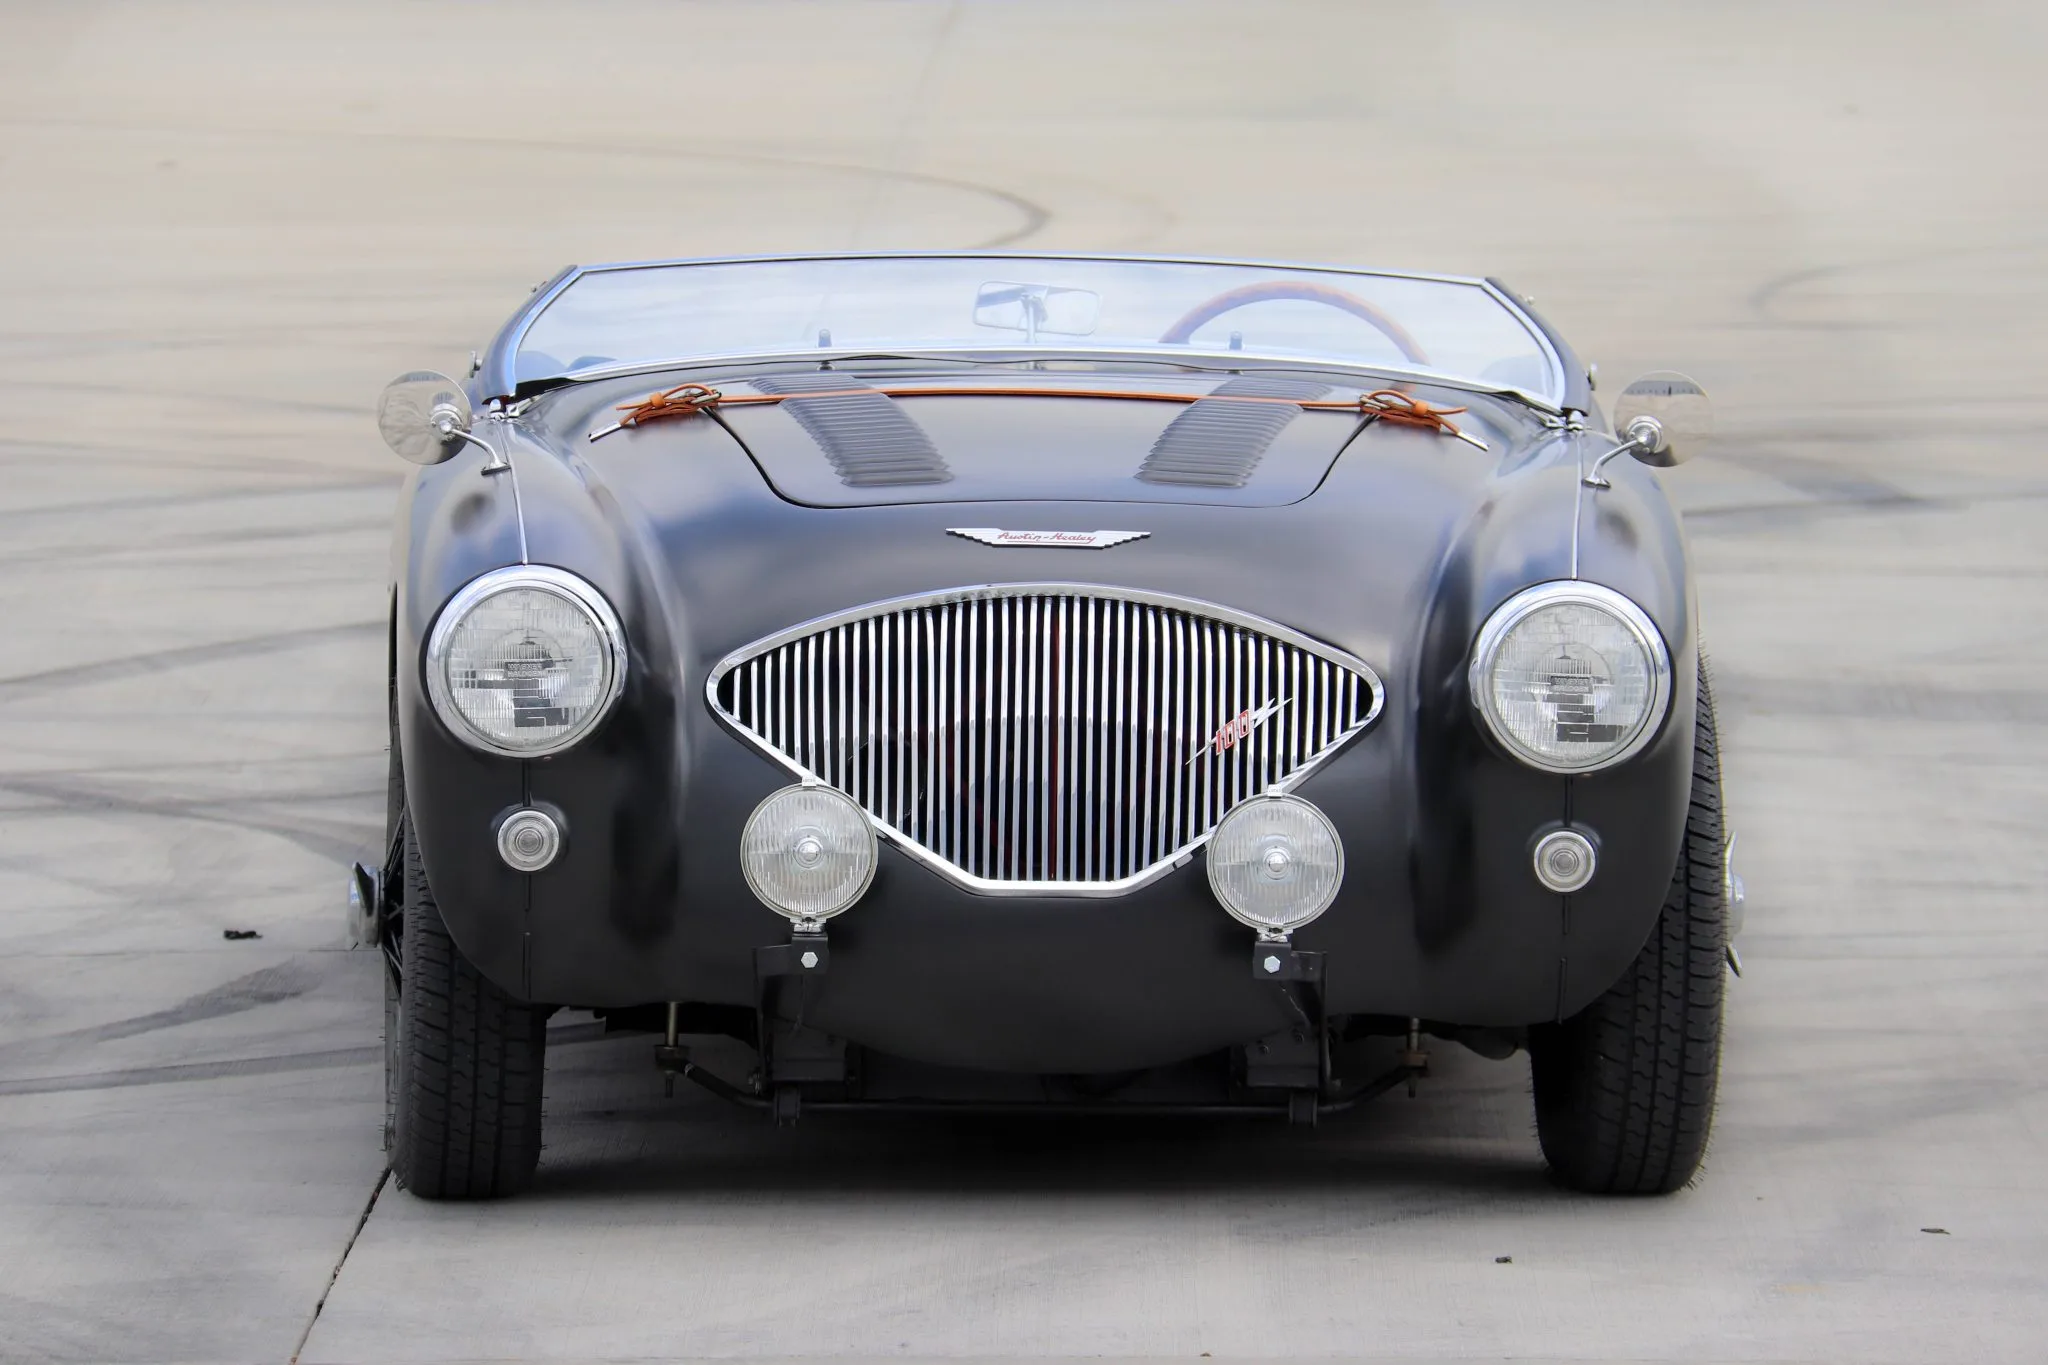 1956 Austin-Healey 100 BN2 Roadster With Le Mans Kit, Auctions, Austin-Healey, Austin-Healey 100, Bring A Trailer, For Sale